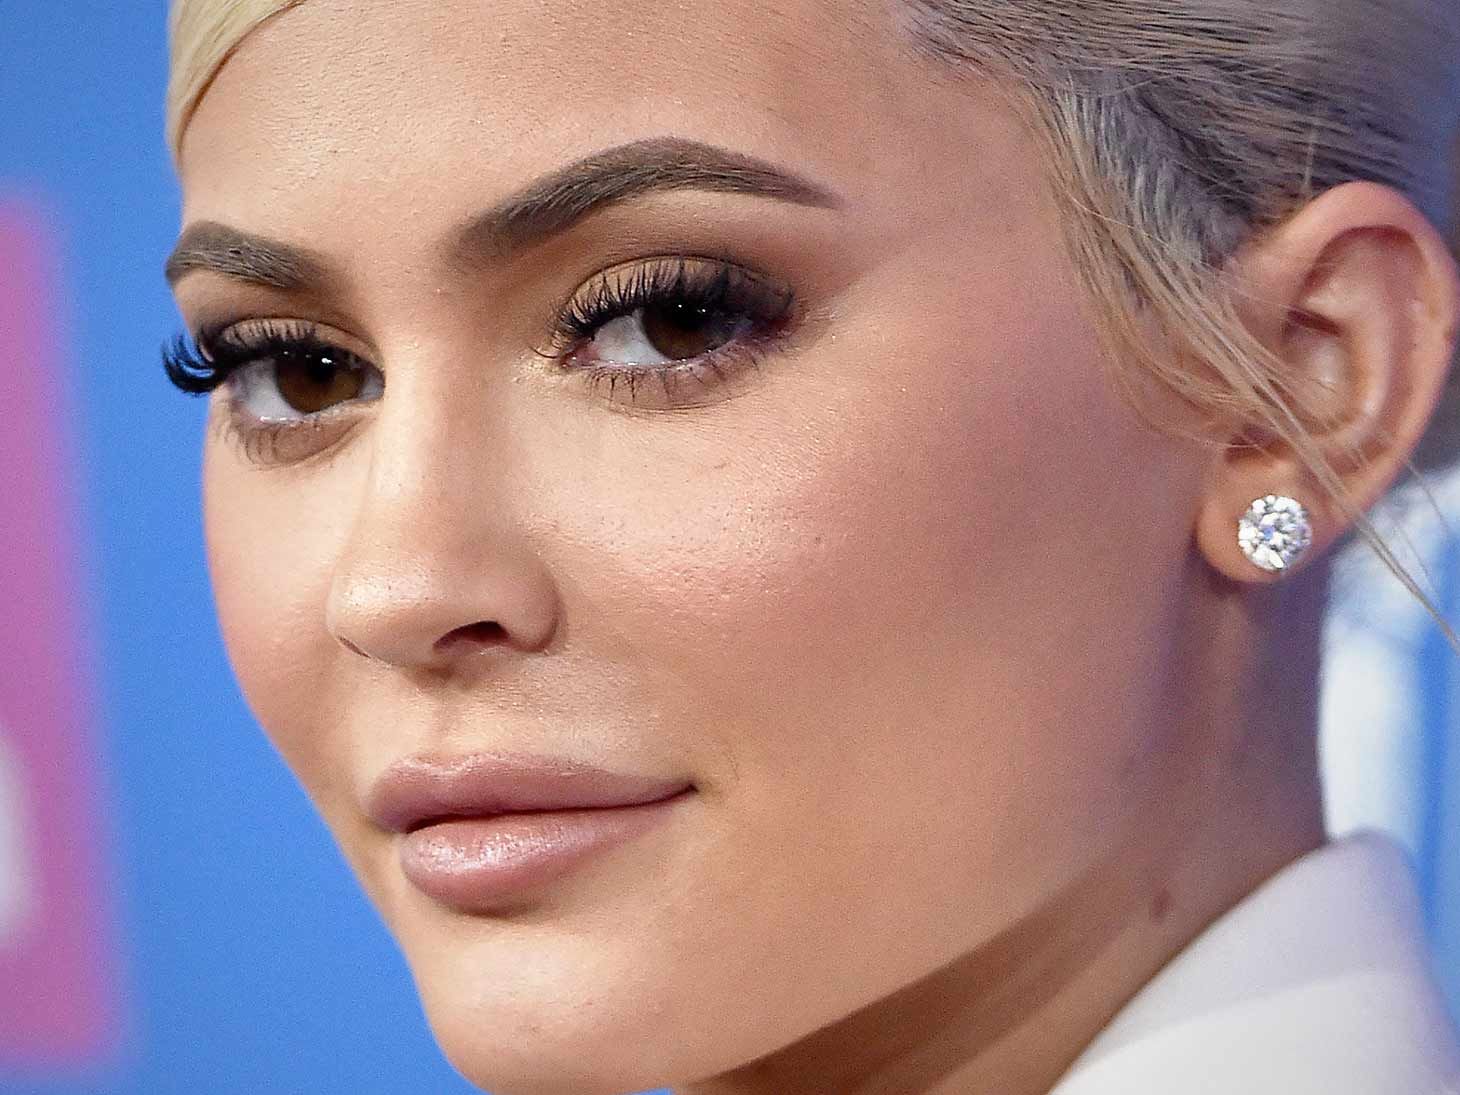 Kylie Jenner Jumps Into the Eyelash Game with 'KYLASH'